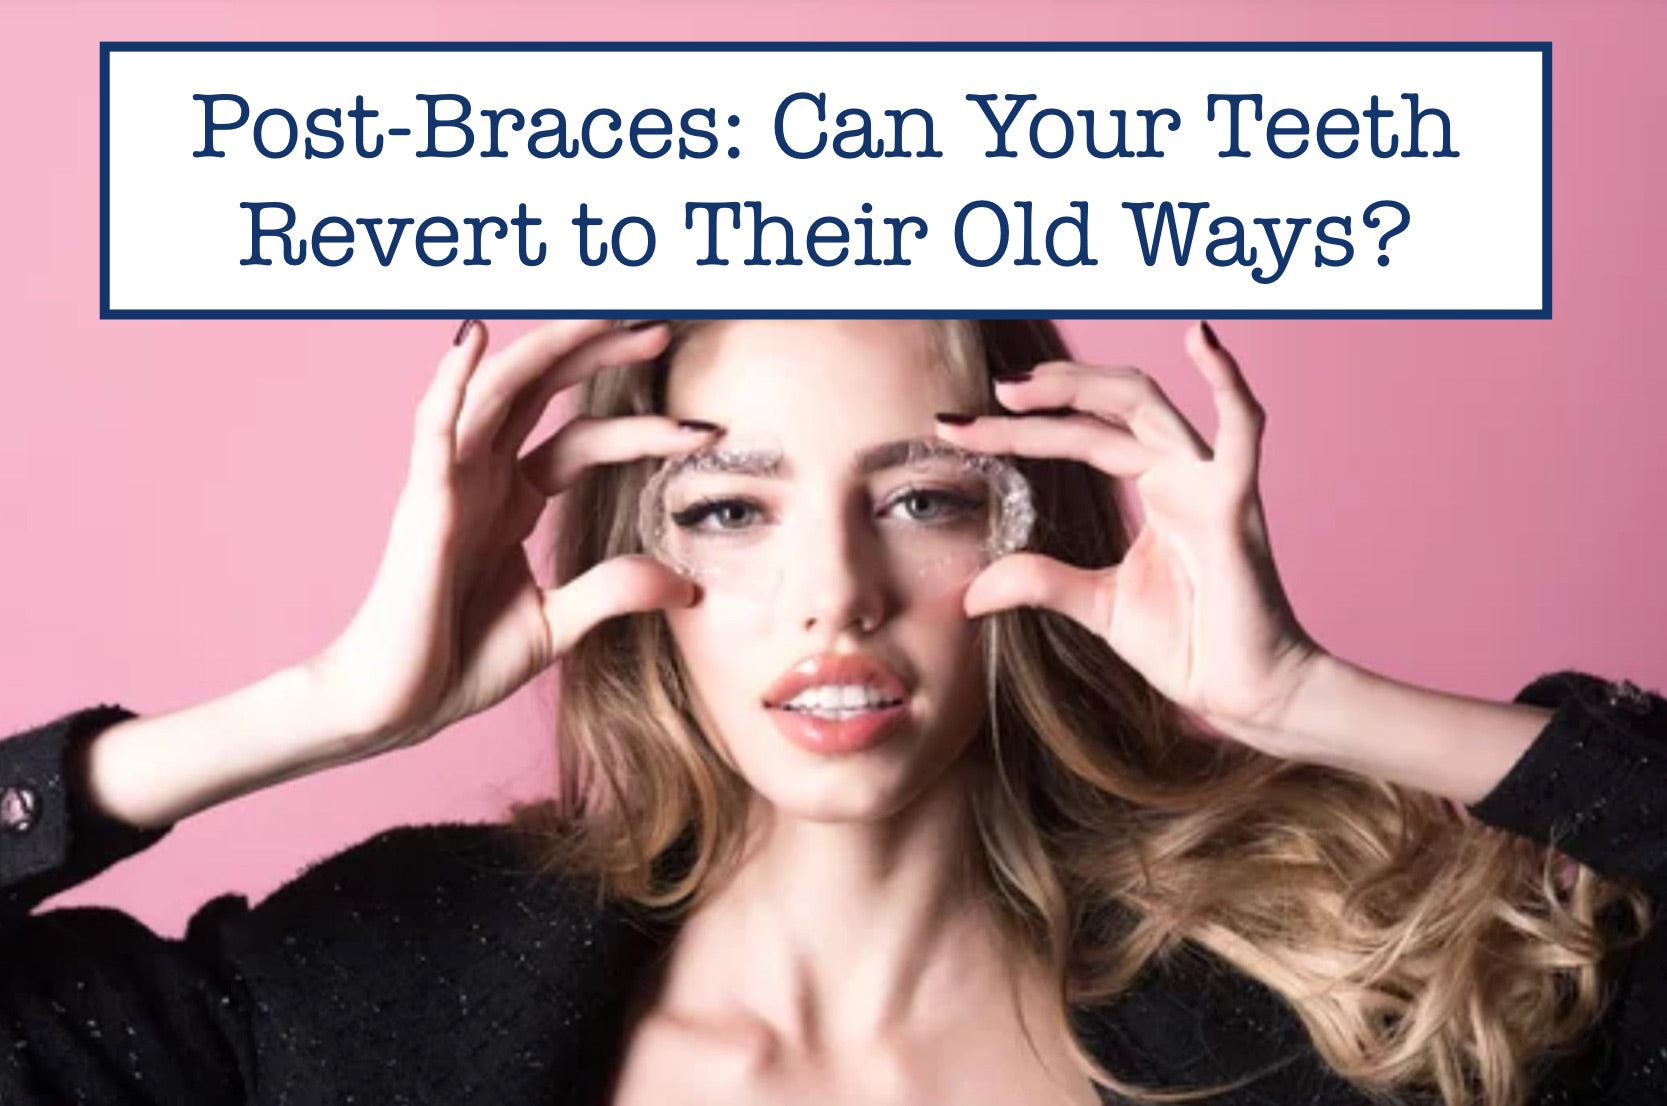 Post-Braces: Can Your Teeth Revert to Their Old Ways?